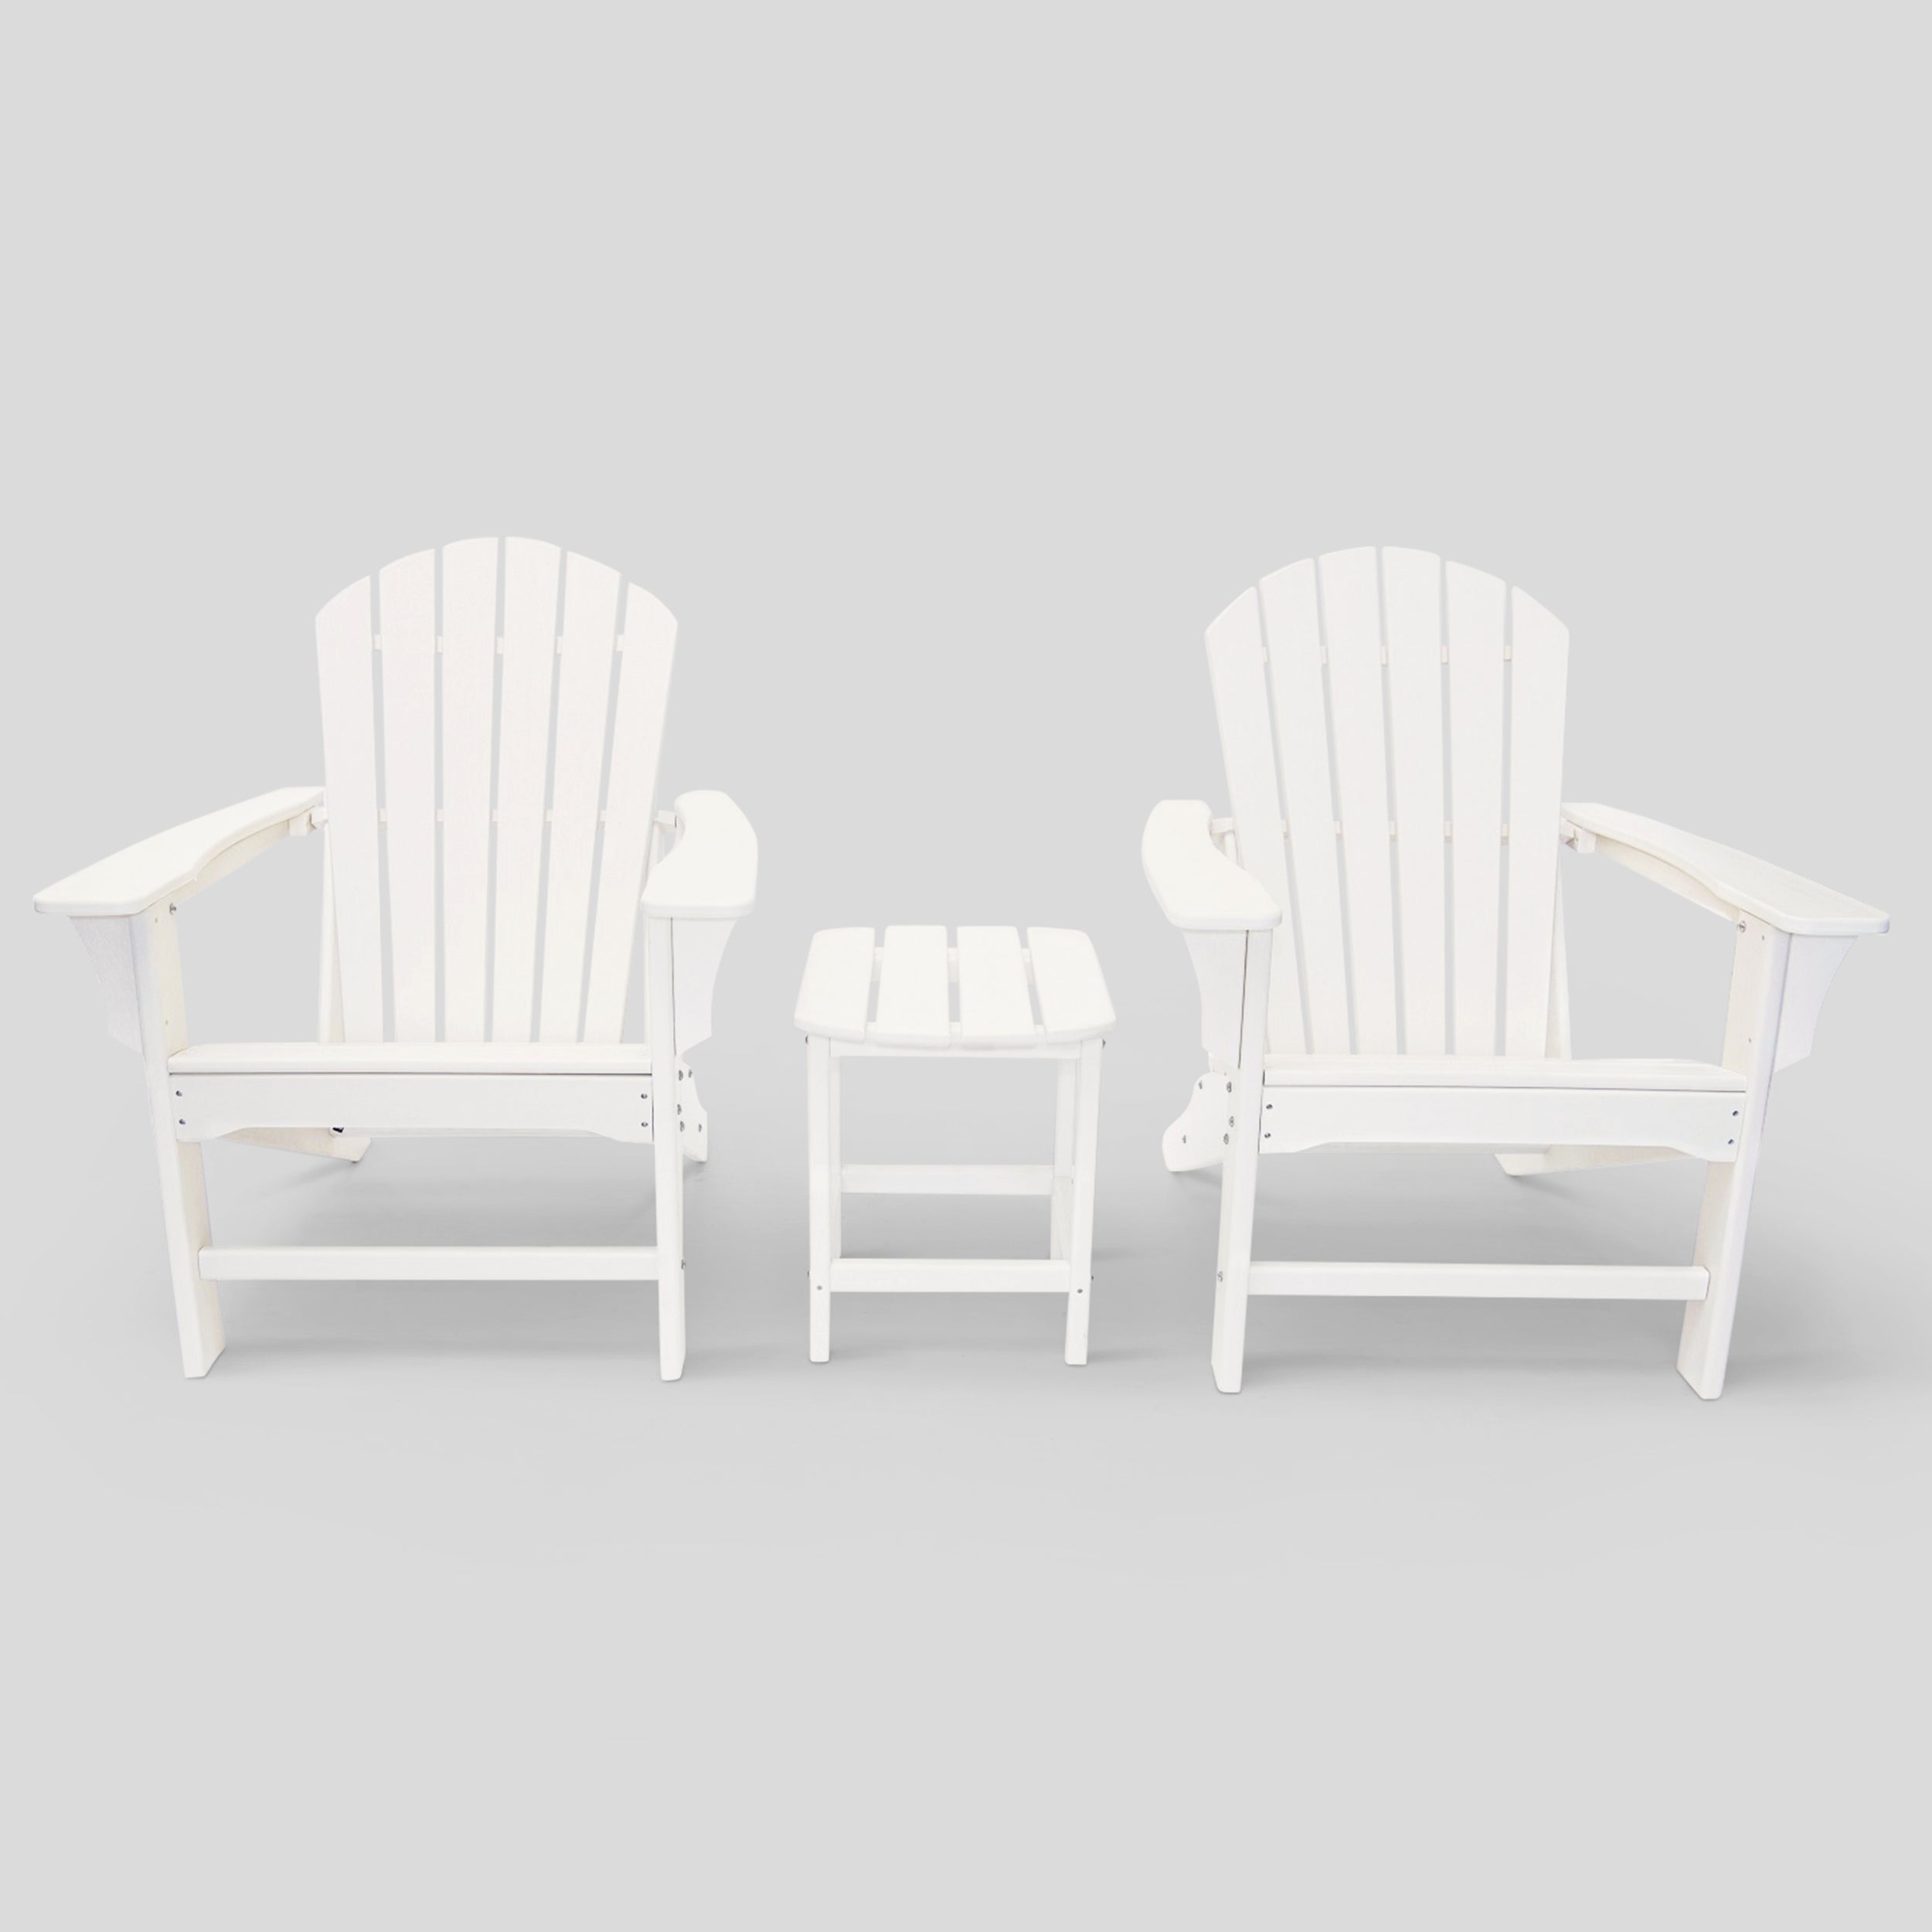 Hampton  Outdoor Patio Adirondack Chairs and Table Set (3-Piece)